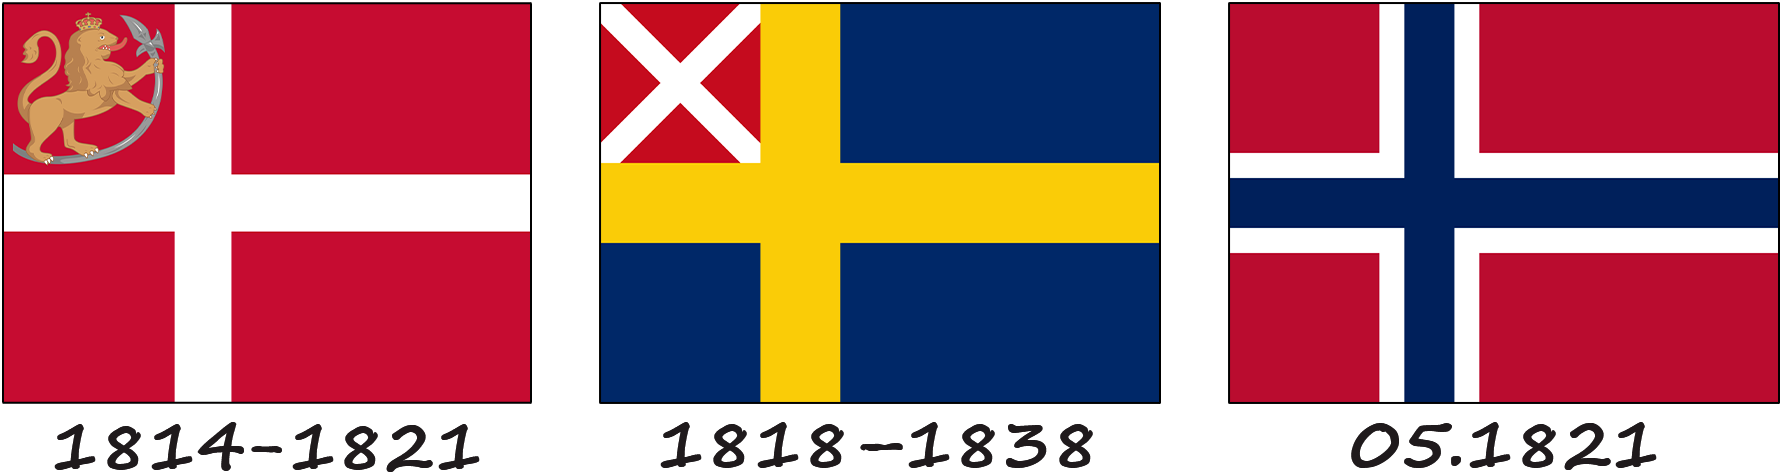 The history of the Norwegian flag